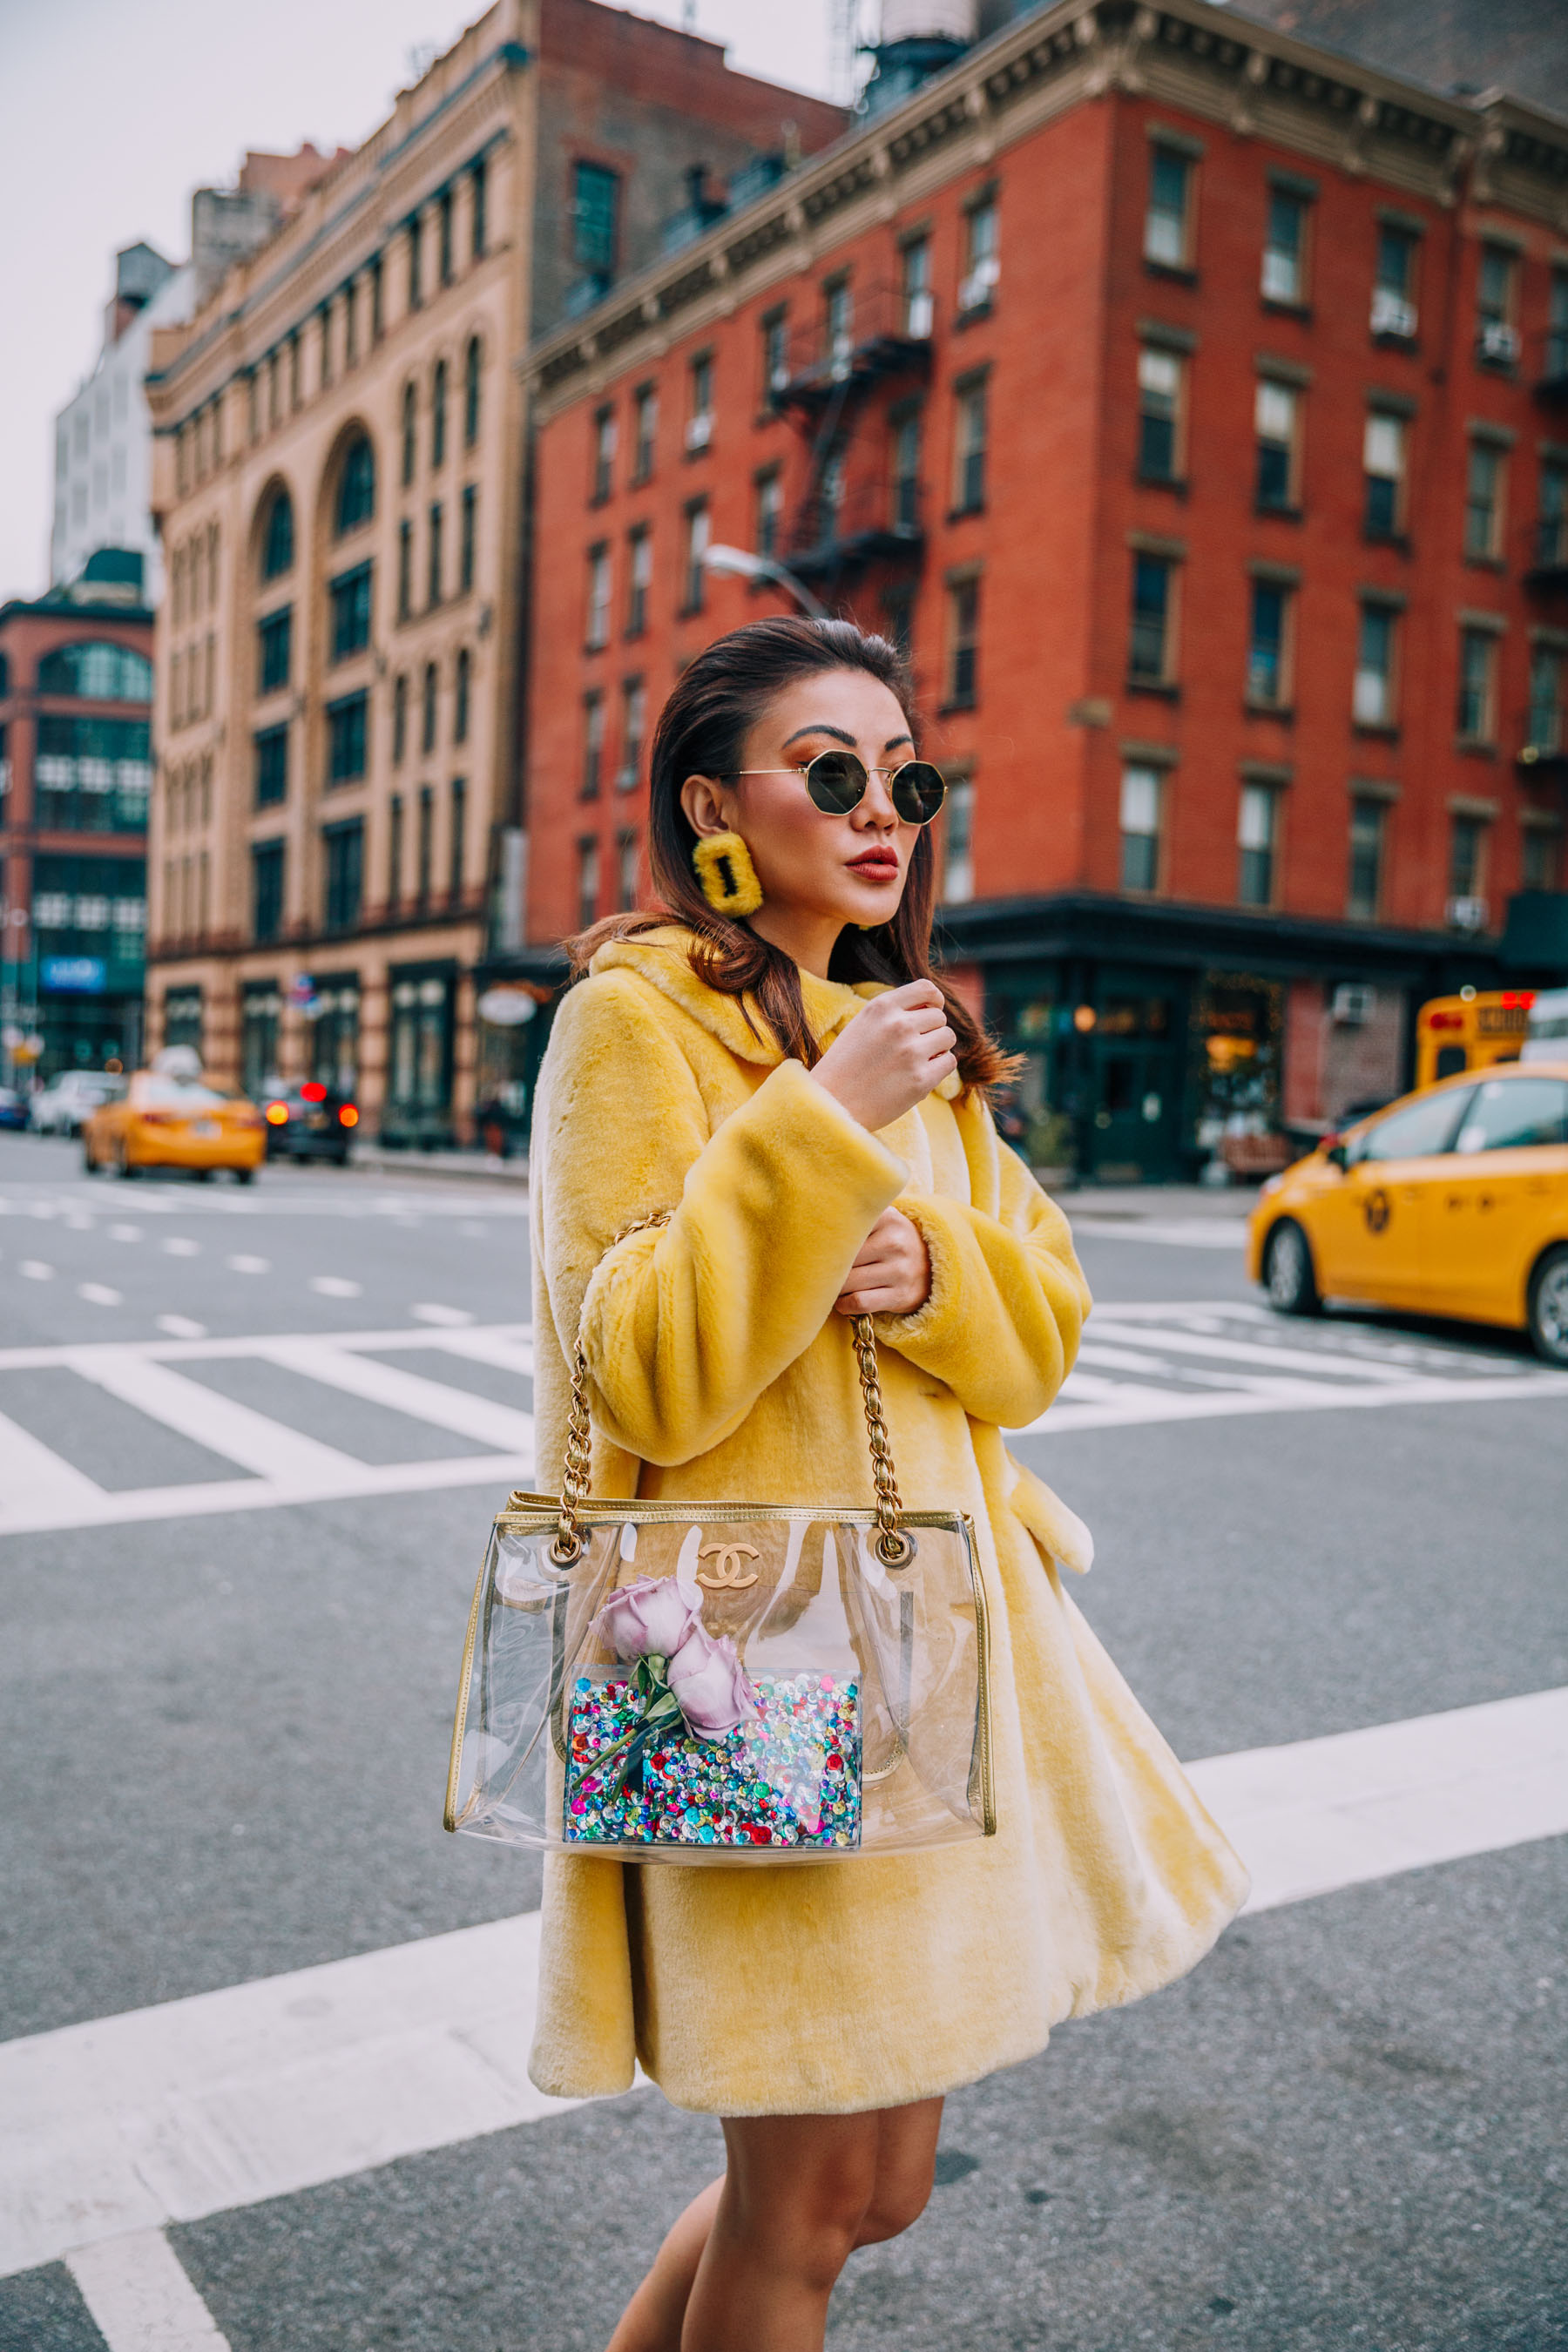 NYFW 2018 Street Style - Shrimps Yellow Fur Coat, Yellow Earrings, and Clear Chanel Bag // Notjessfashion.com